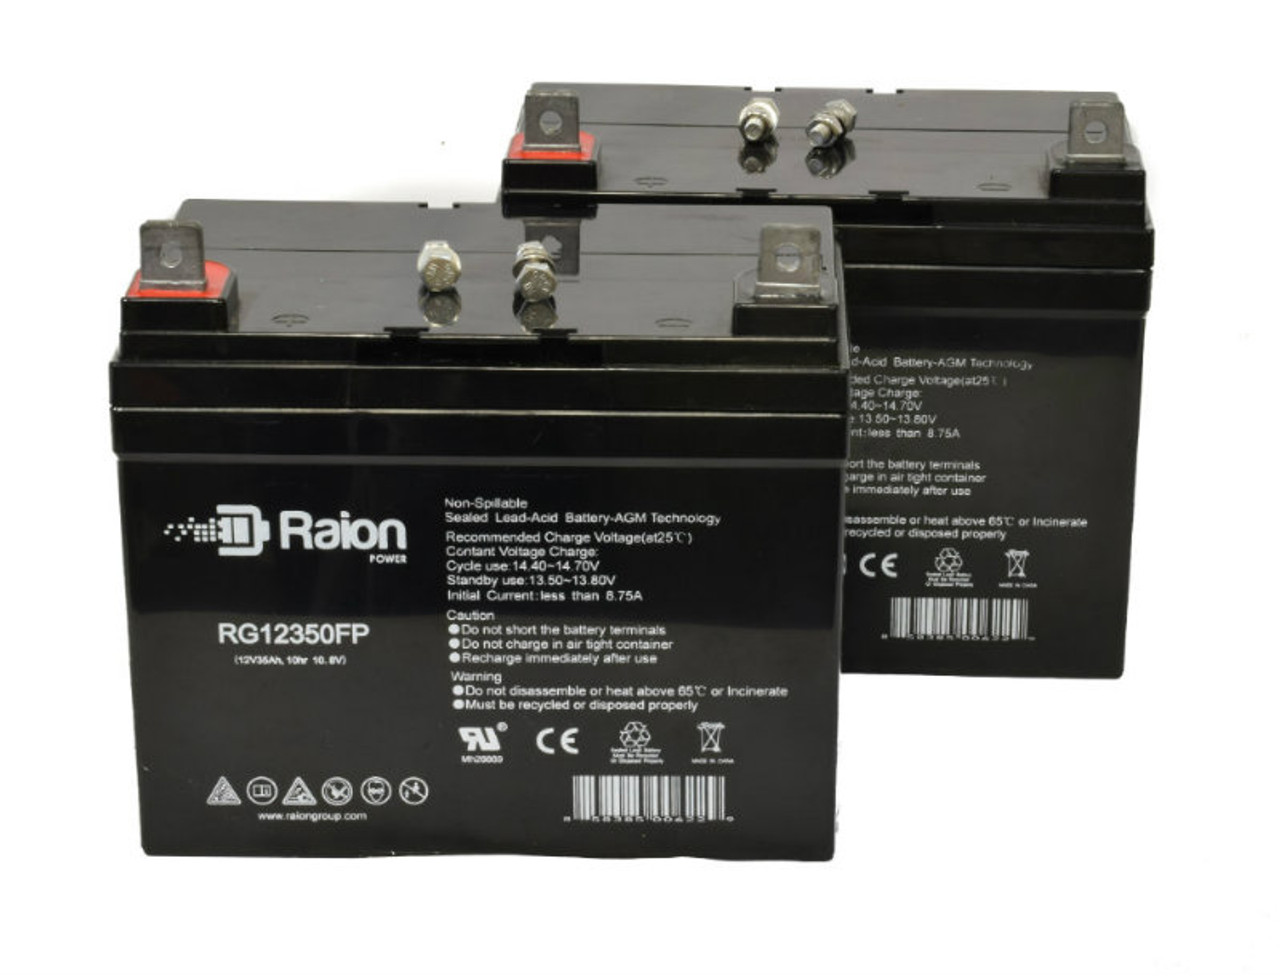 Raion Power Replacement 12V 35Ah Lawn Mower Battery for Kubota G5200 - 2 Pack